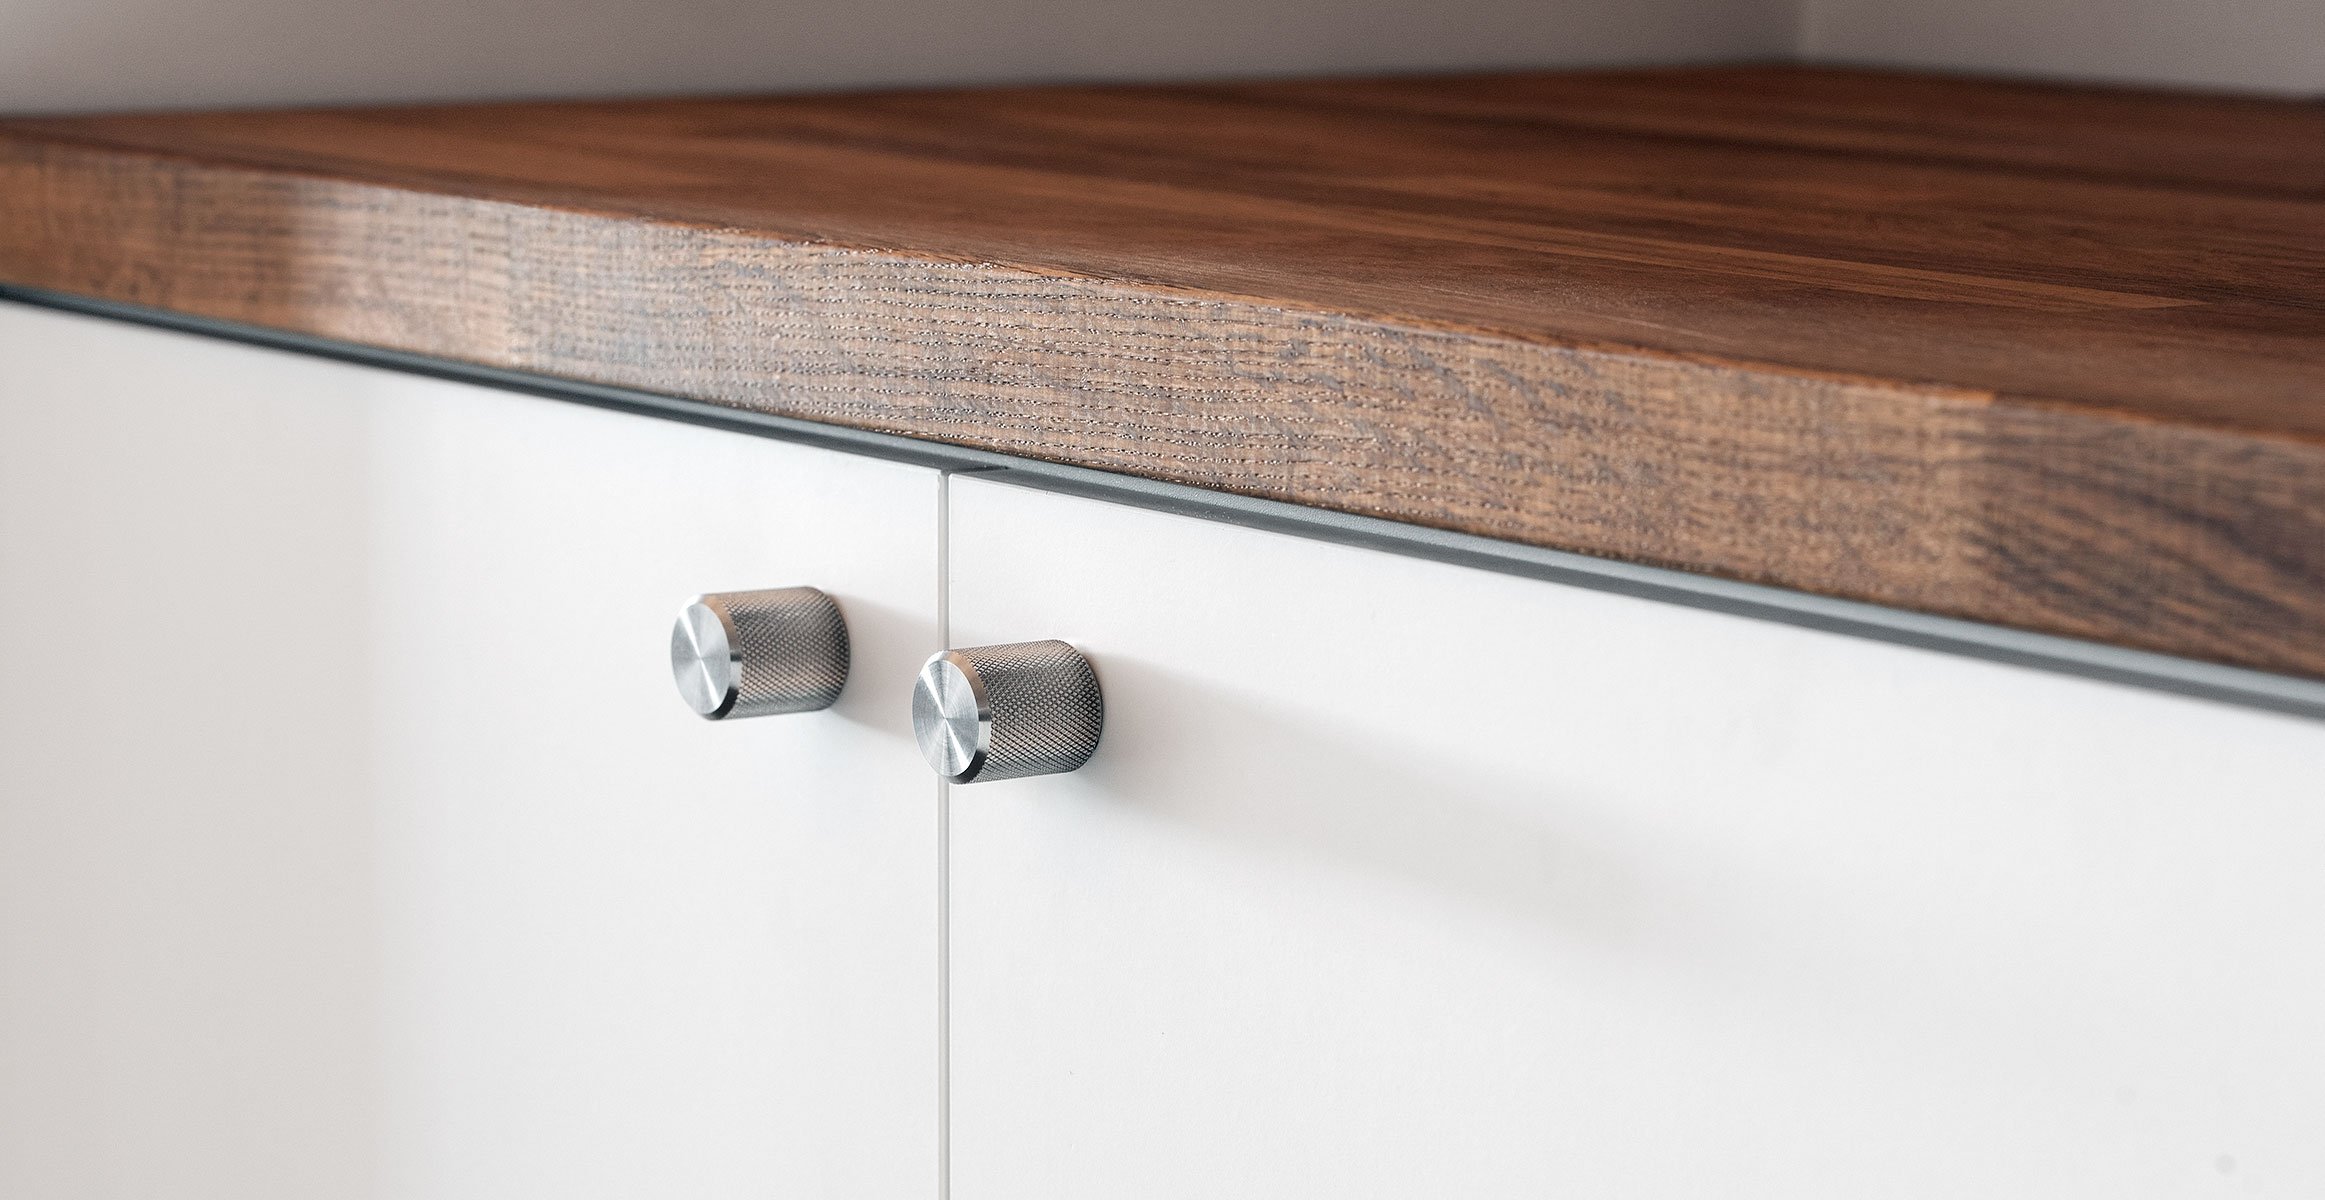 Kitchen cabinet featuring the Kor Cabinet Knob in Stainless Steel finish